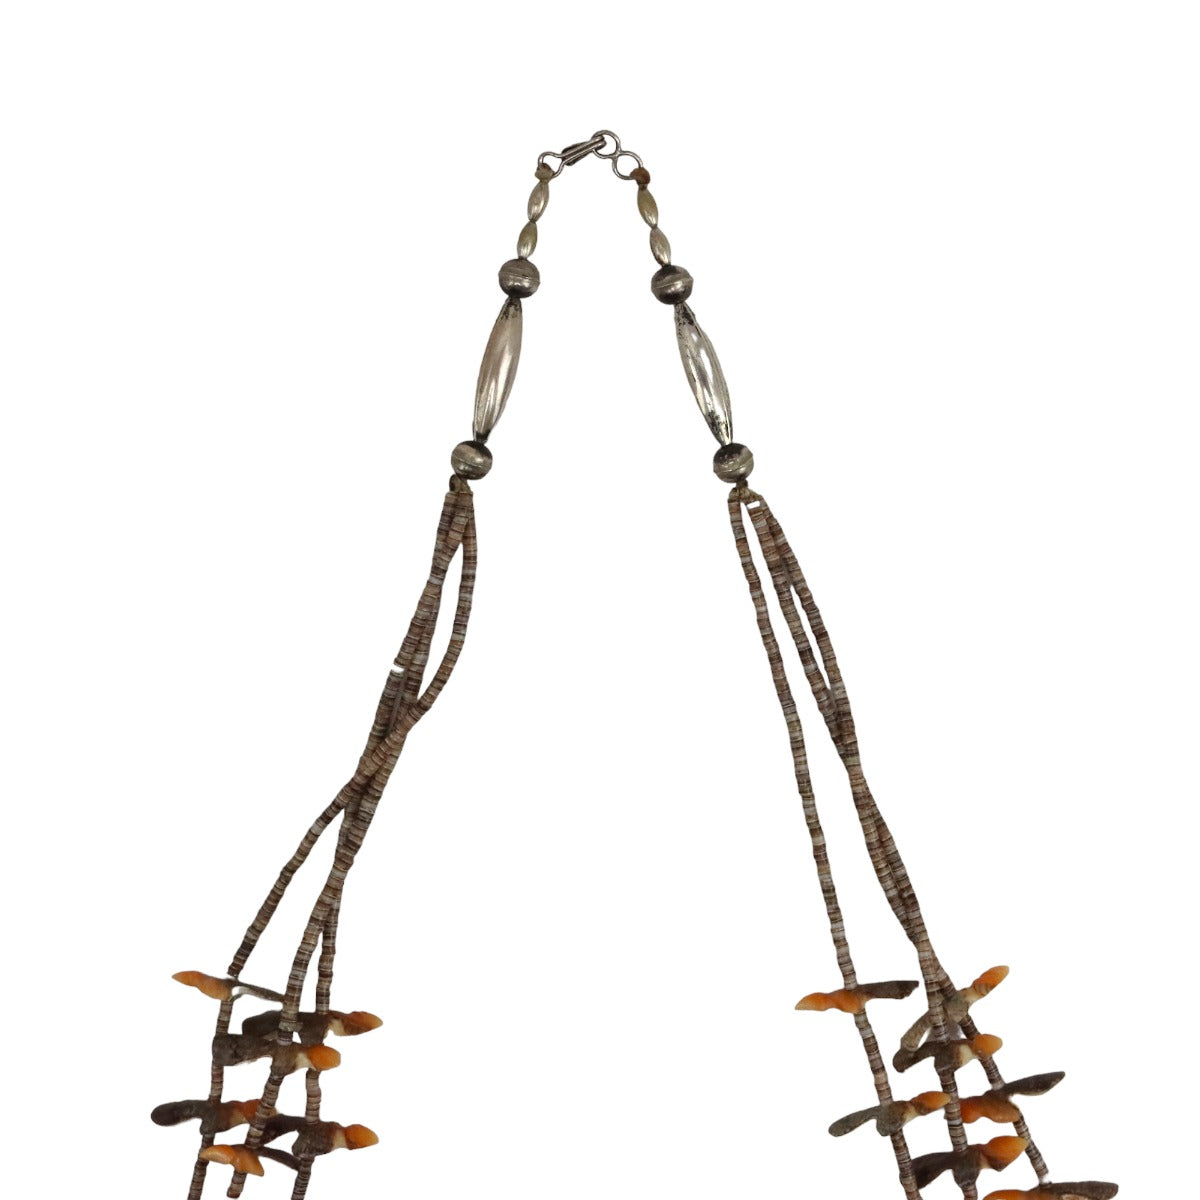 Santo Domingo (Kewa) or Zuni 3-Strand Spiny Oyster Fetish and Pinshell Heishi Necklace c. 1970s, 29" length (J15076-CO-024) 2